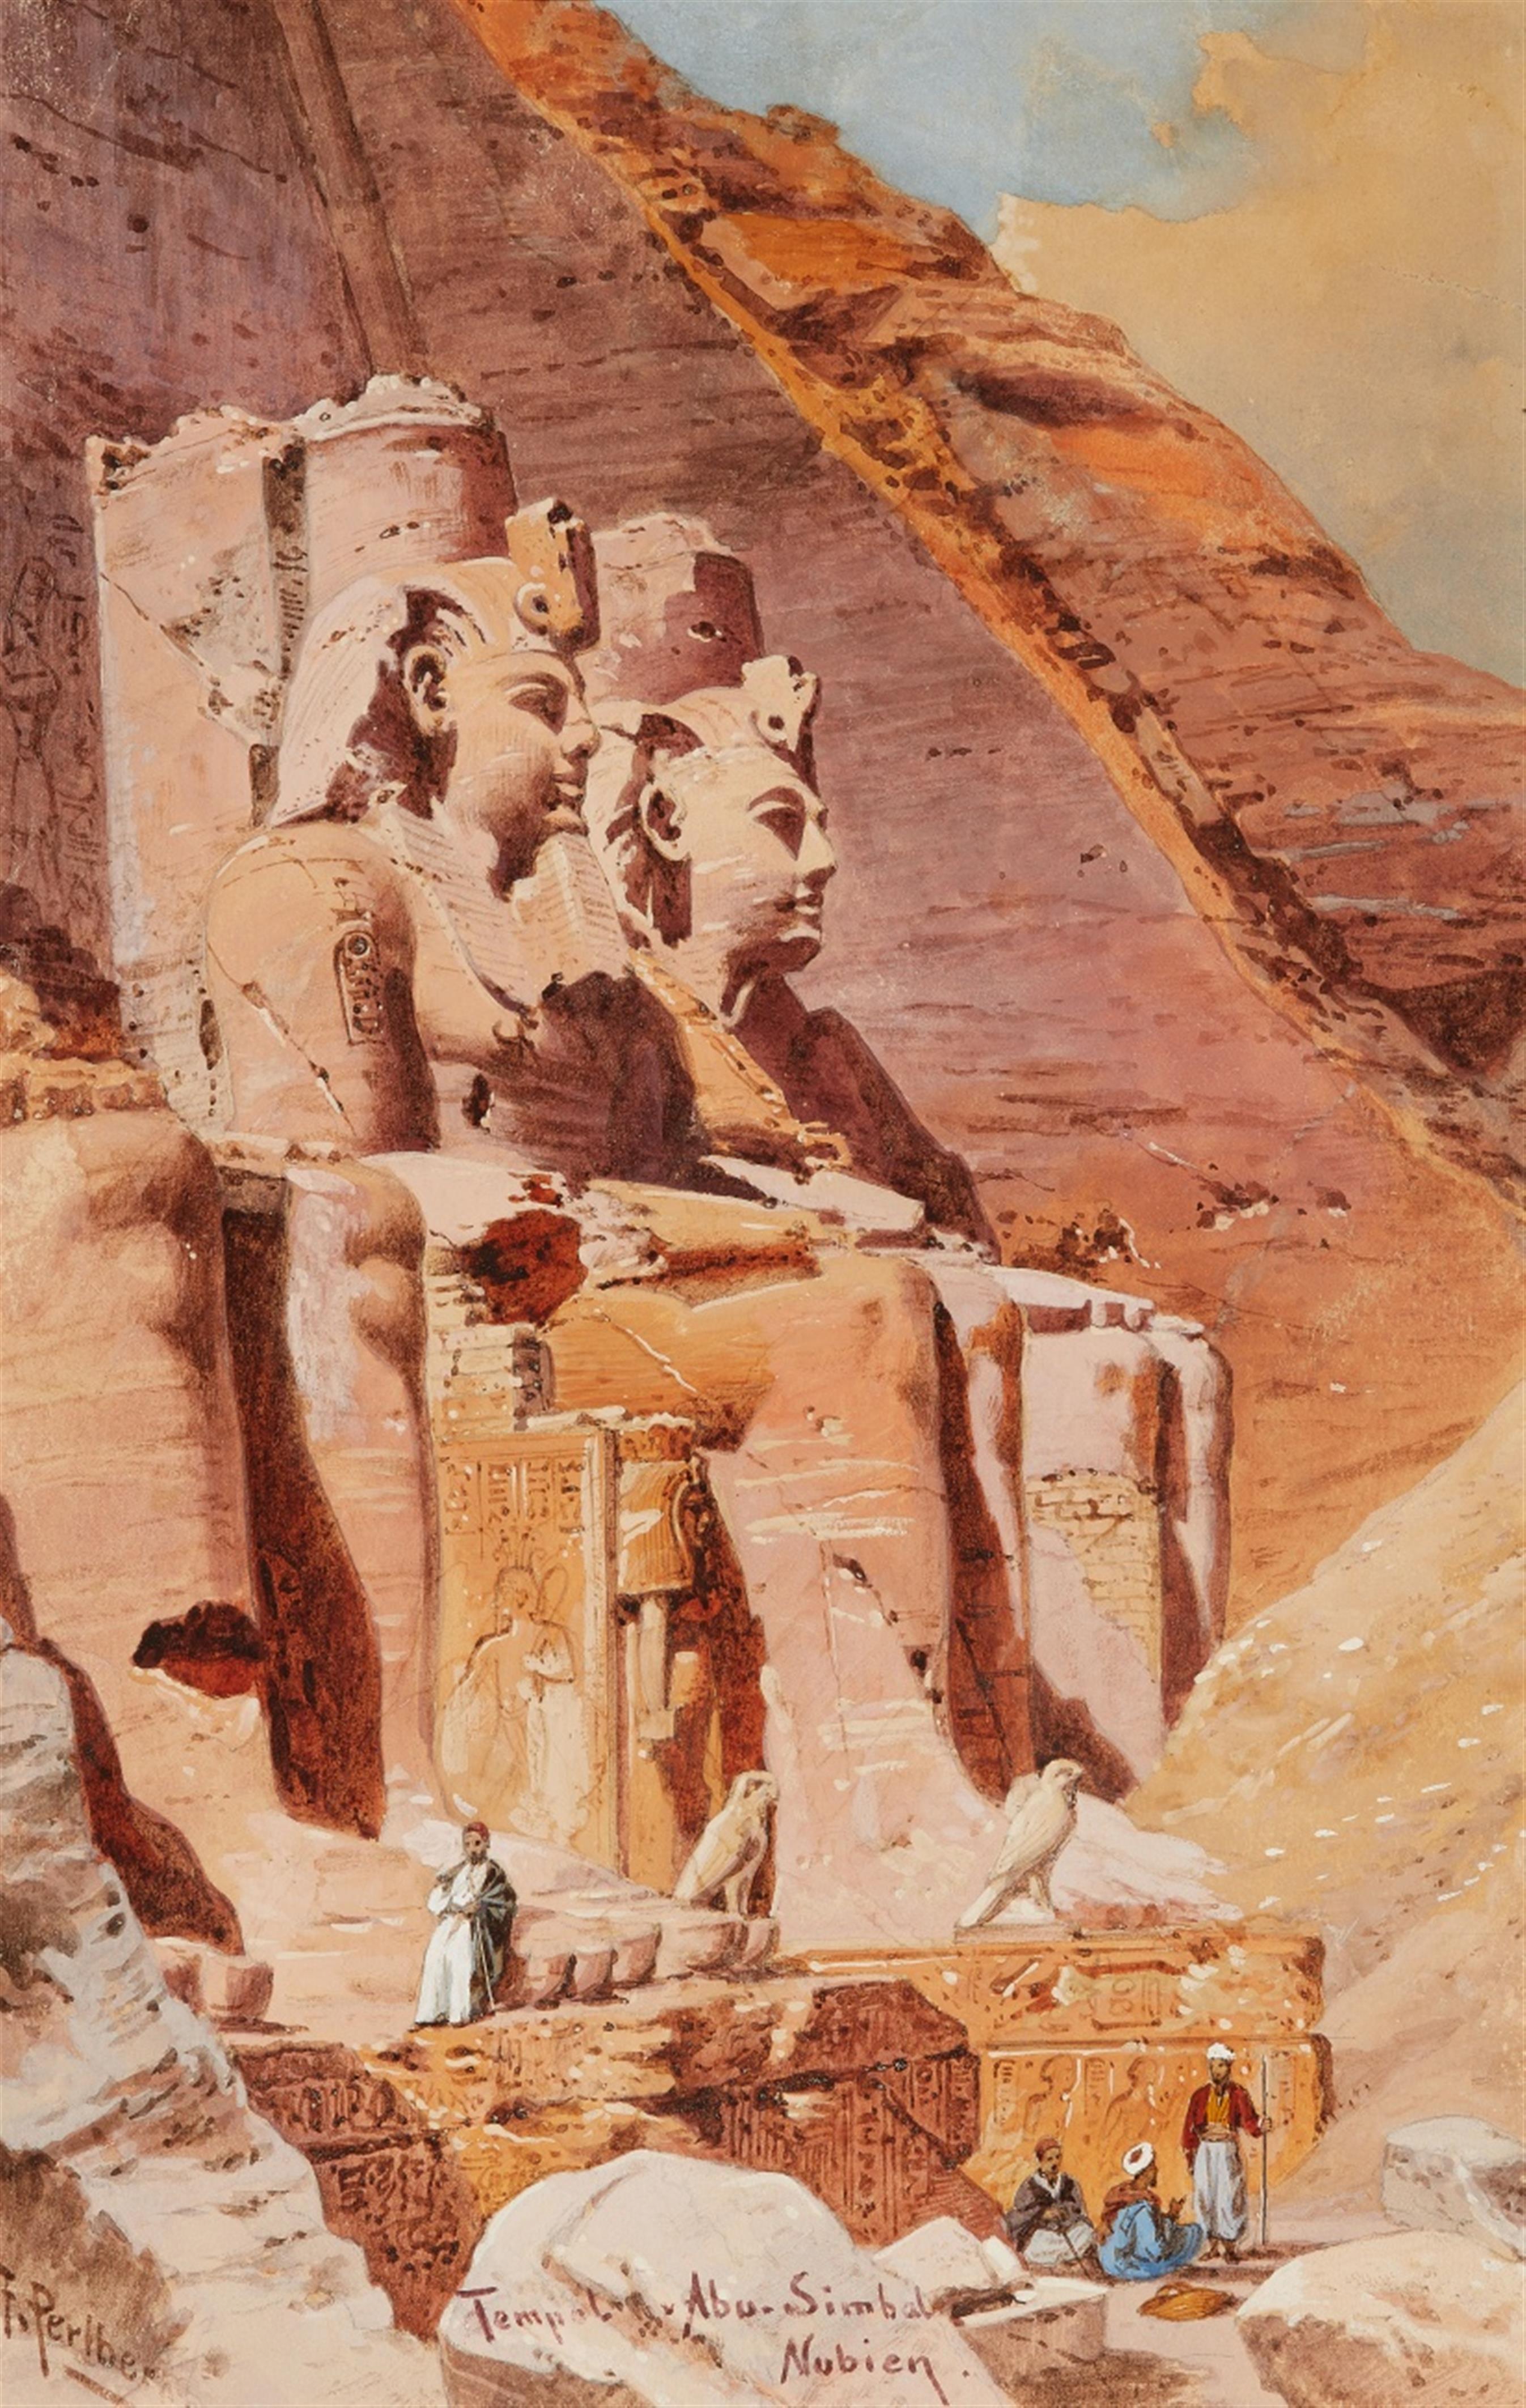 Friedrich Perlberg - The Monumental Statues at the Mountain Temple of Abu Simbel in Egypt - image-1